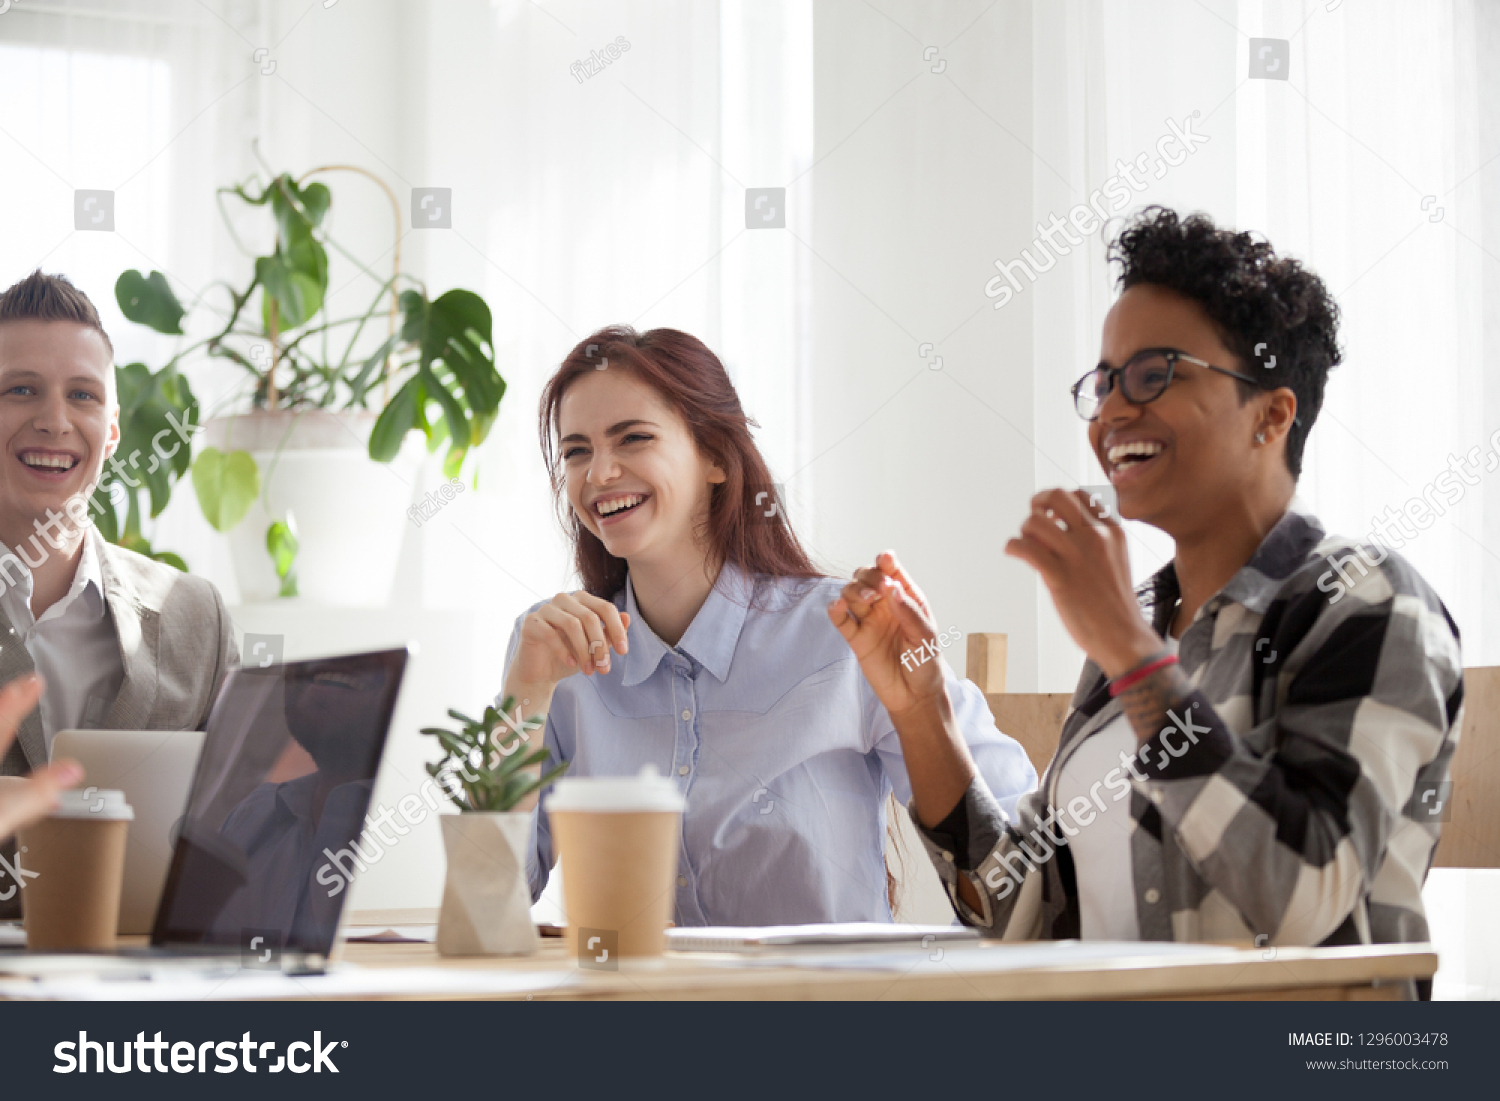 Happy joyful diverse business people laughing at funny joke talking at work break, cheerful corporate team office workers multi-ethnic young coworkers having fun engaged in teambuilding activity #1296003478